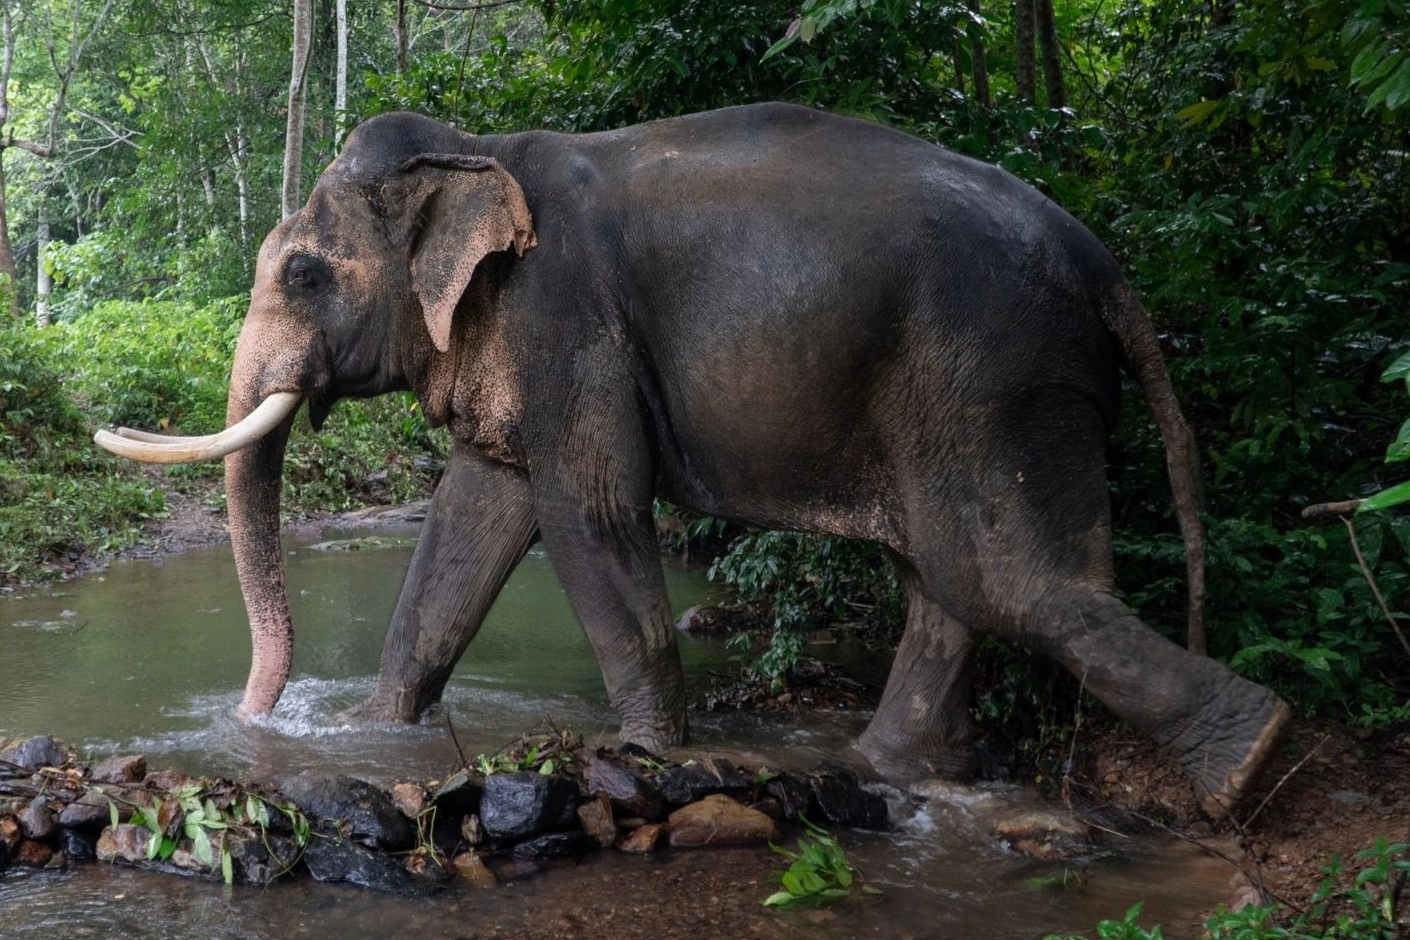 Elephant riding and bathing now 'unacceptable' in latest travel association  guidelines | World Animal Protection